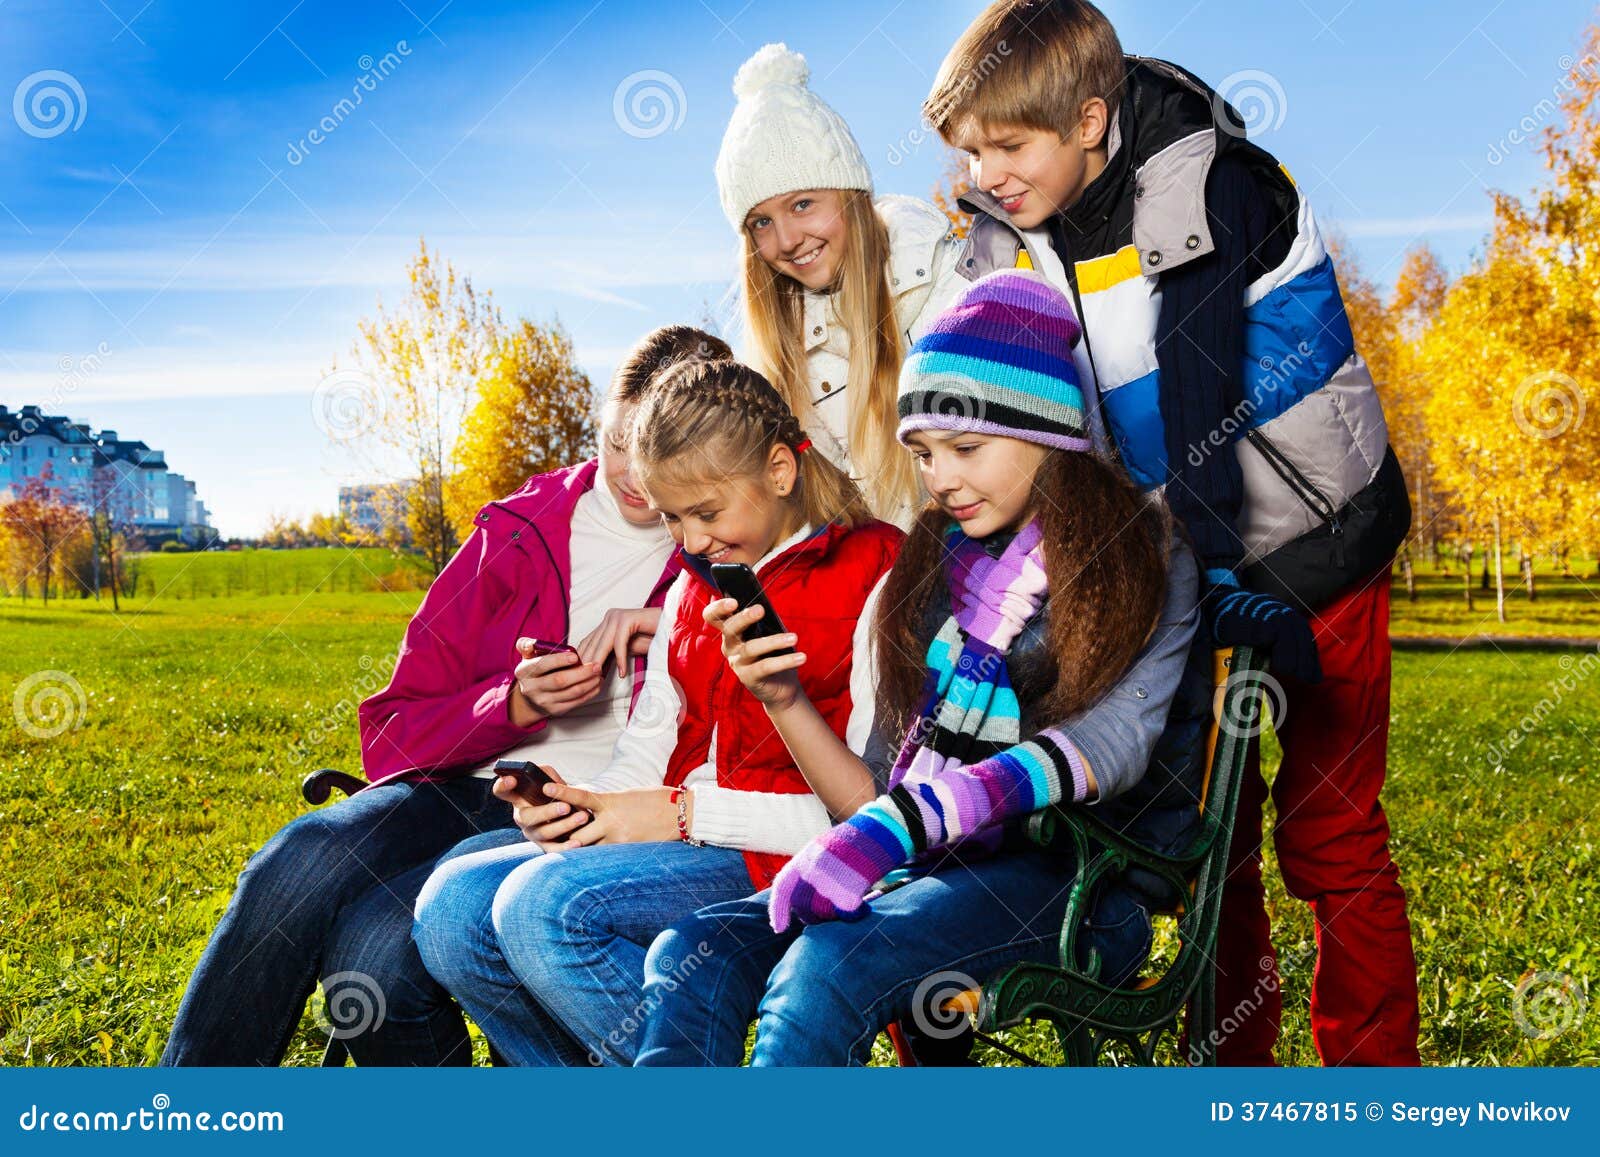 Teens Occupied With Gadgets Stock Image - Image of ...